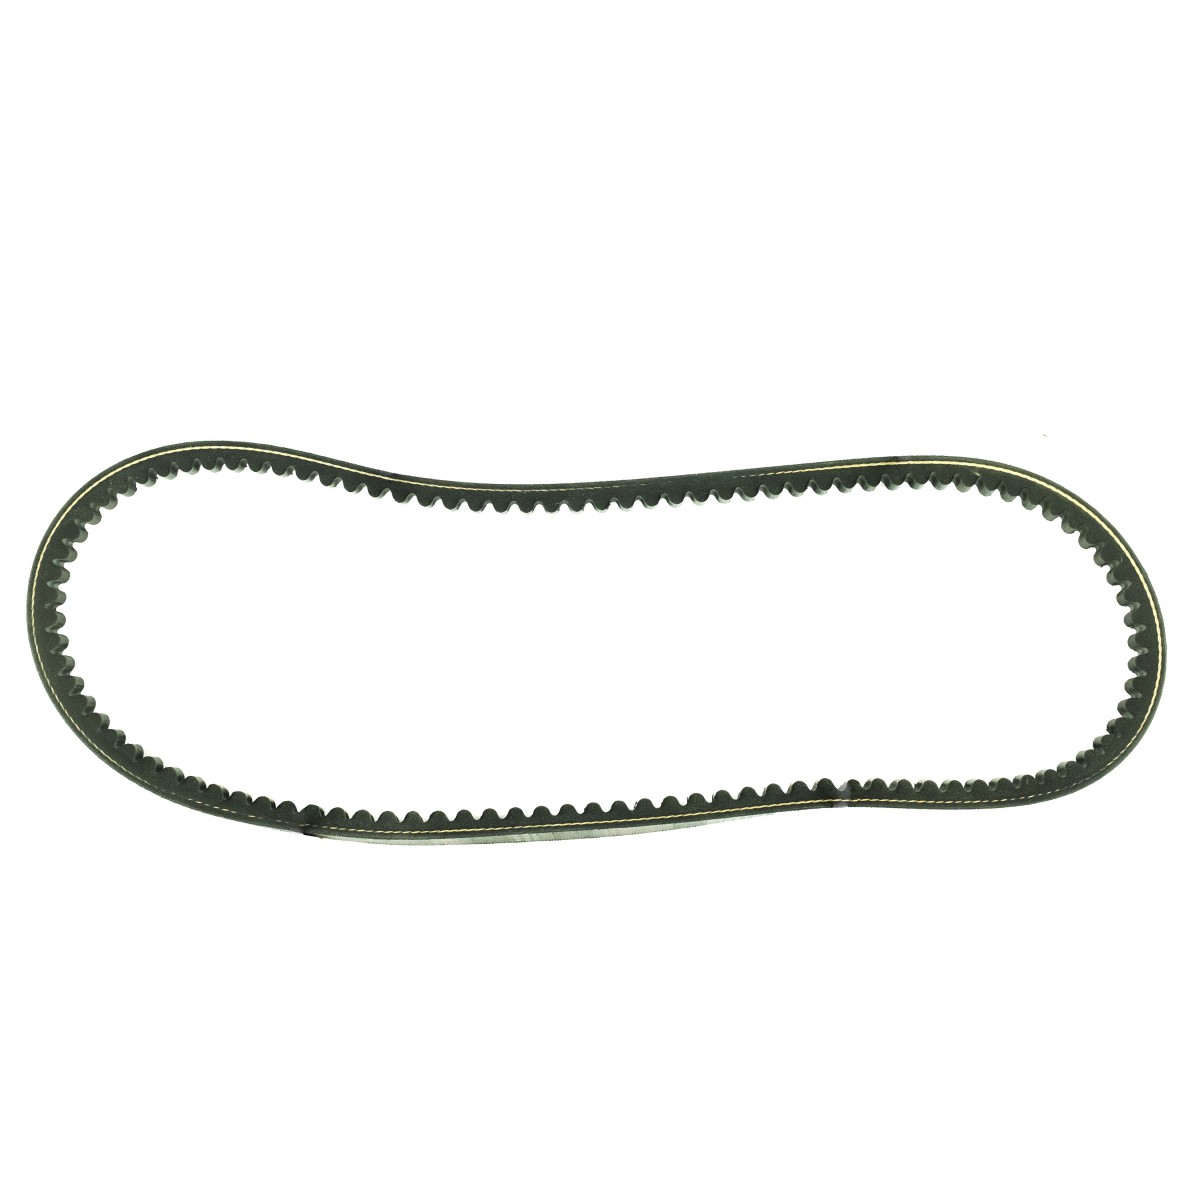 17 x 1300 V-belt for AGF 140/160/180/200/220 GEOGRASS and AGF 140/160/180/200/220 flail mowers with TRX valves